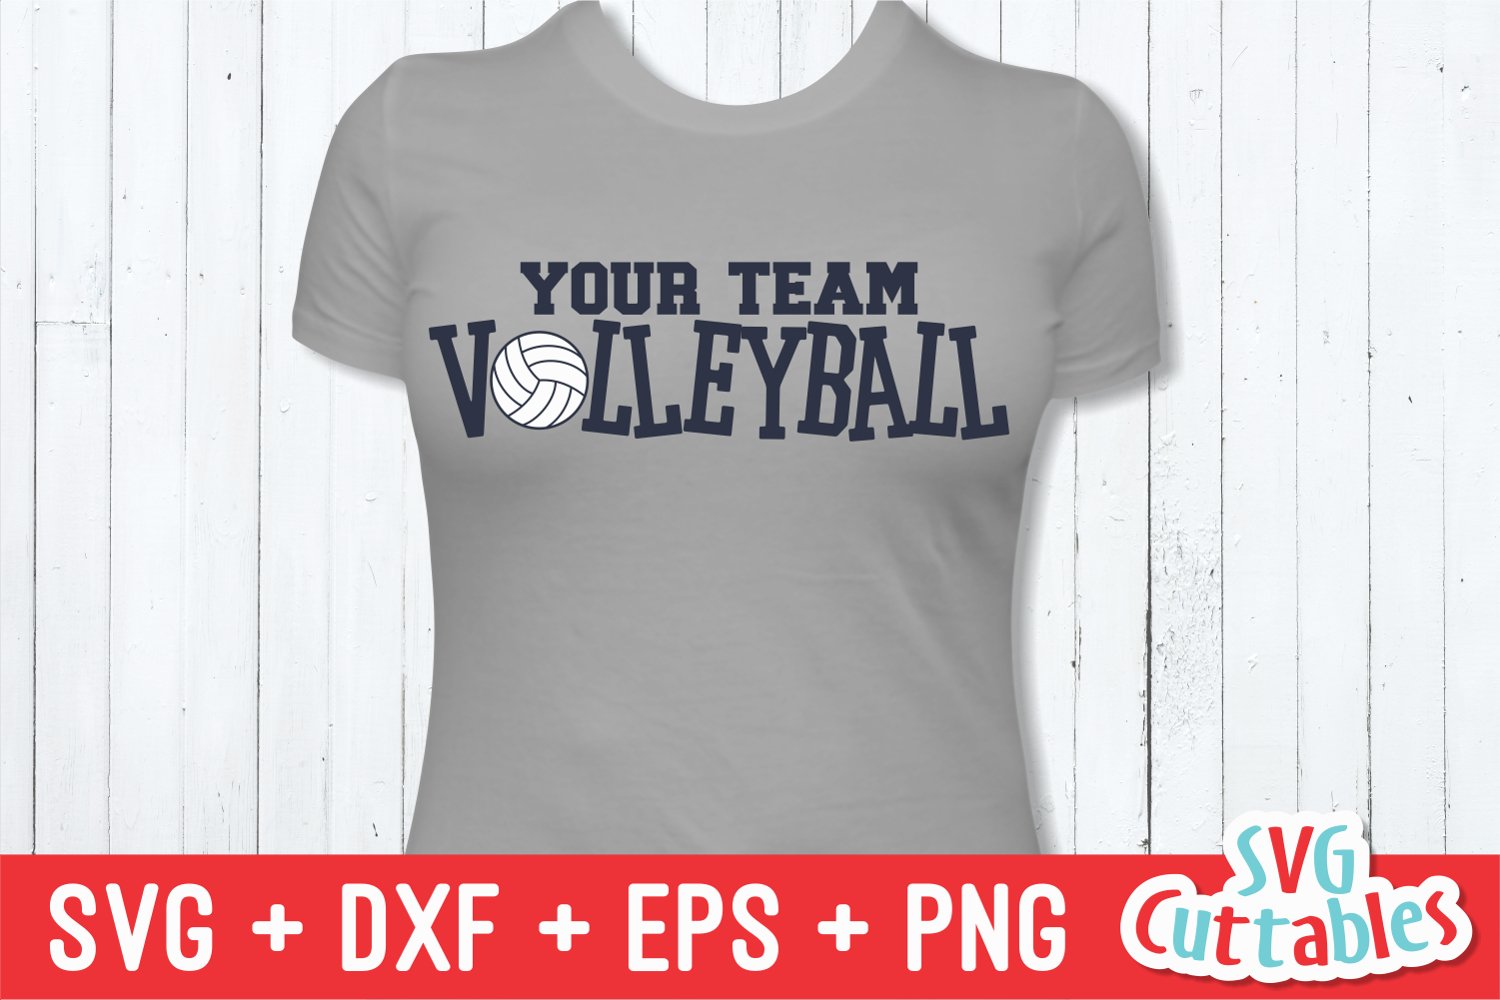 Volleyball t-shirt design for your team.